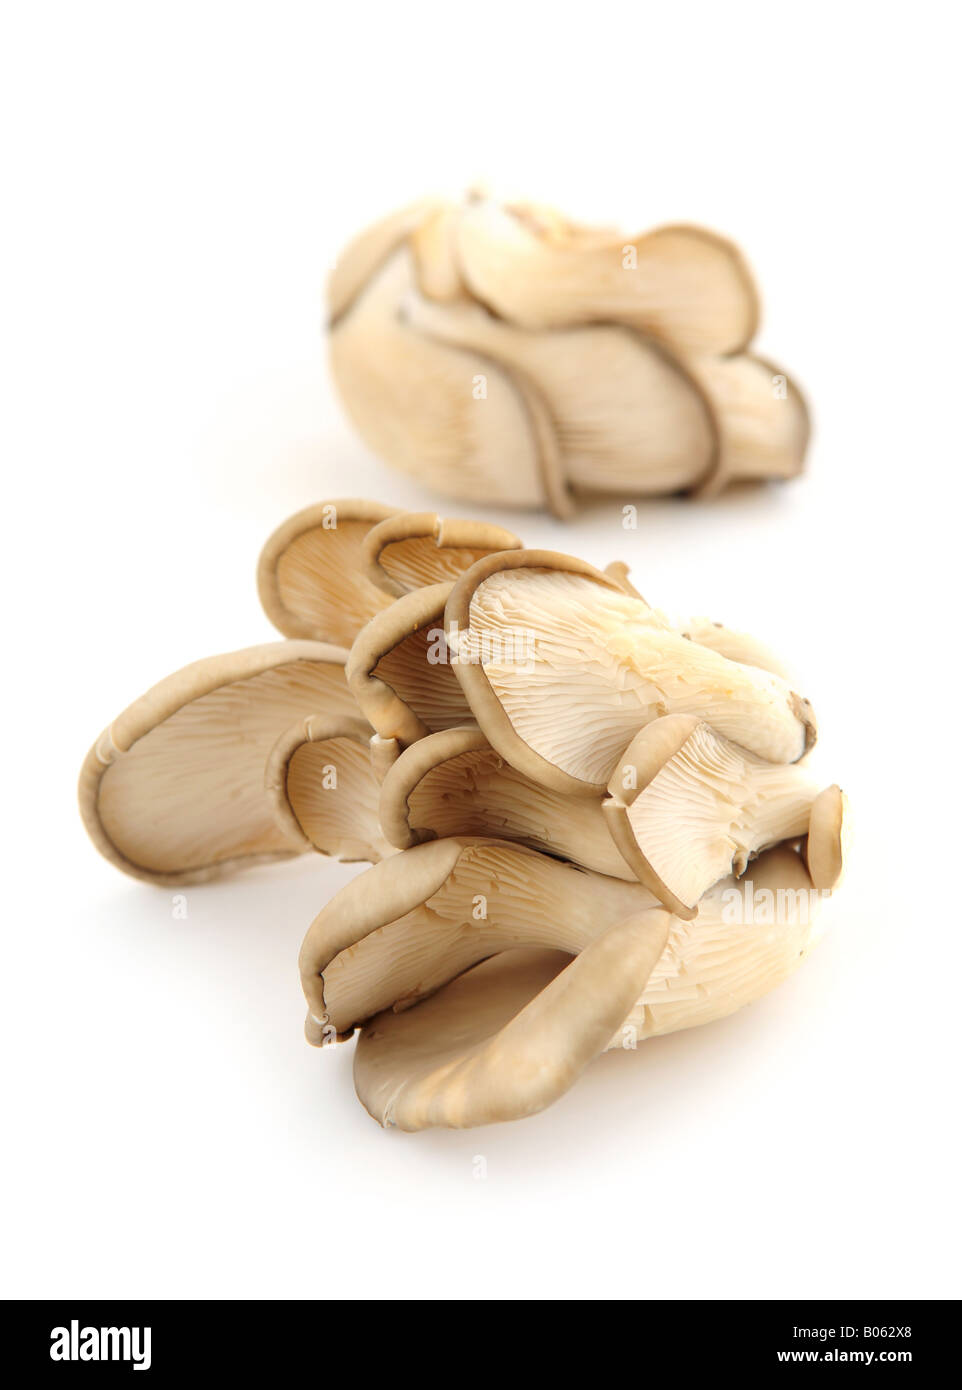 Clusters of oyster mushrooms isolated on white background Stock Photo